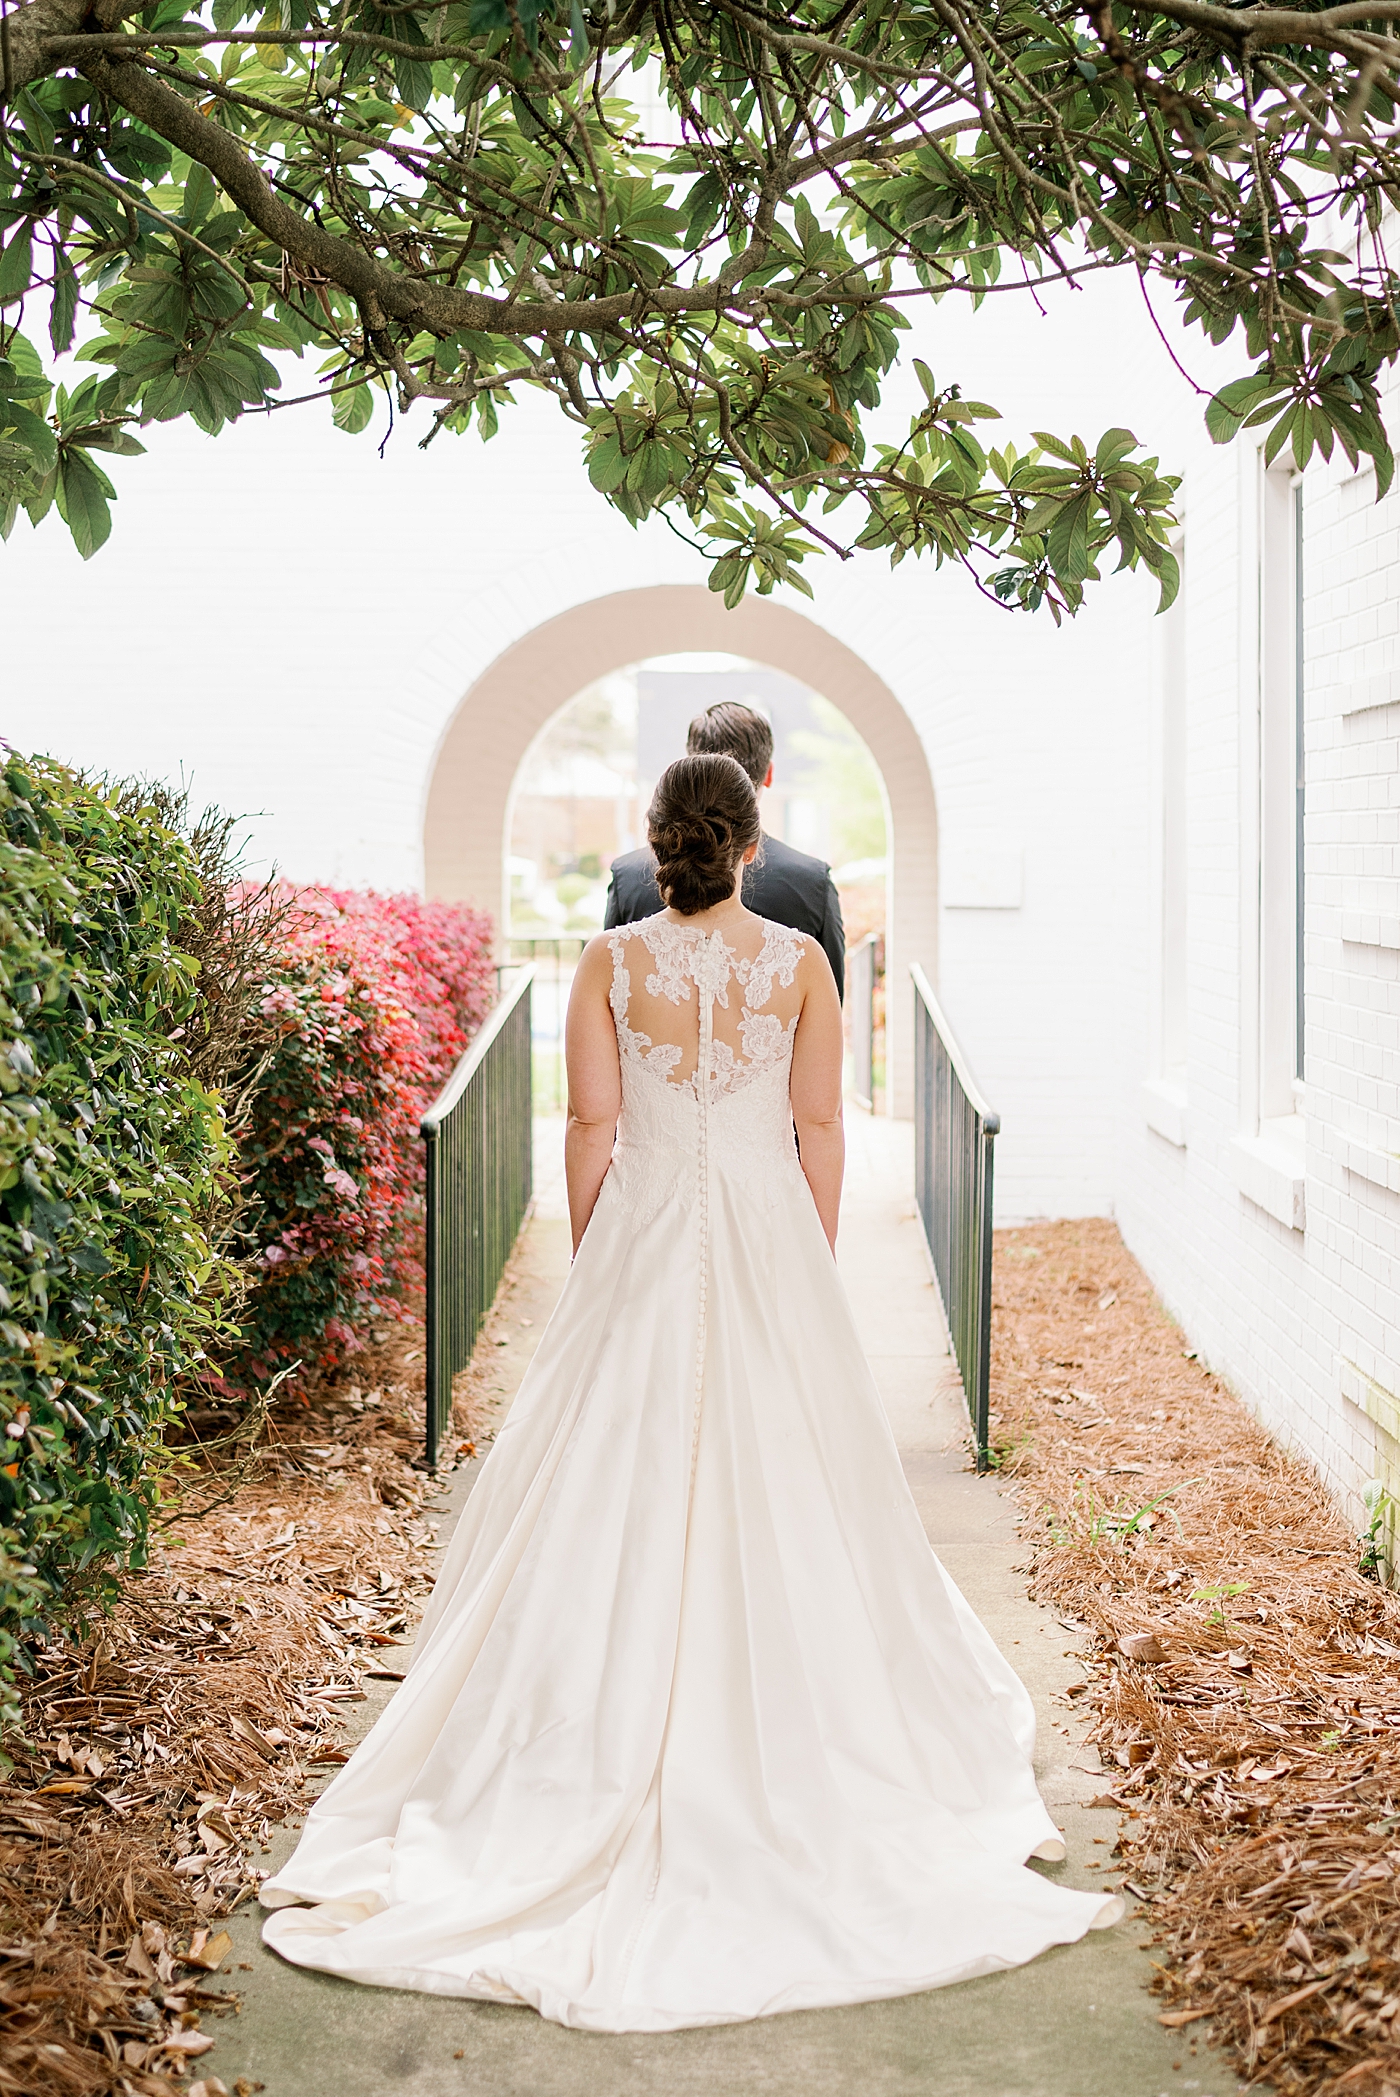 Bride walking toward groom for their first look | Photo by Annie Laura Photography